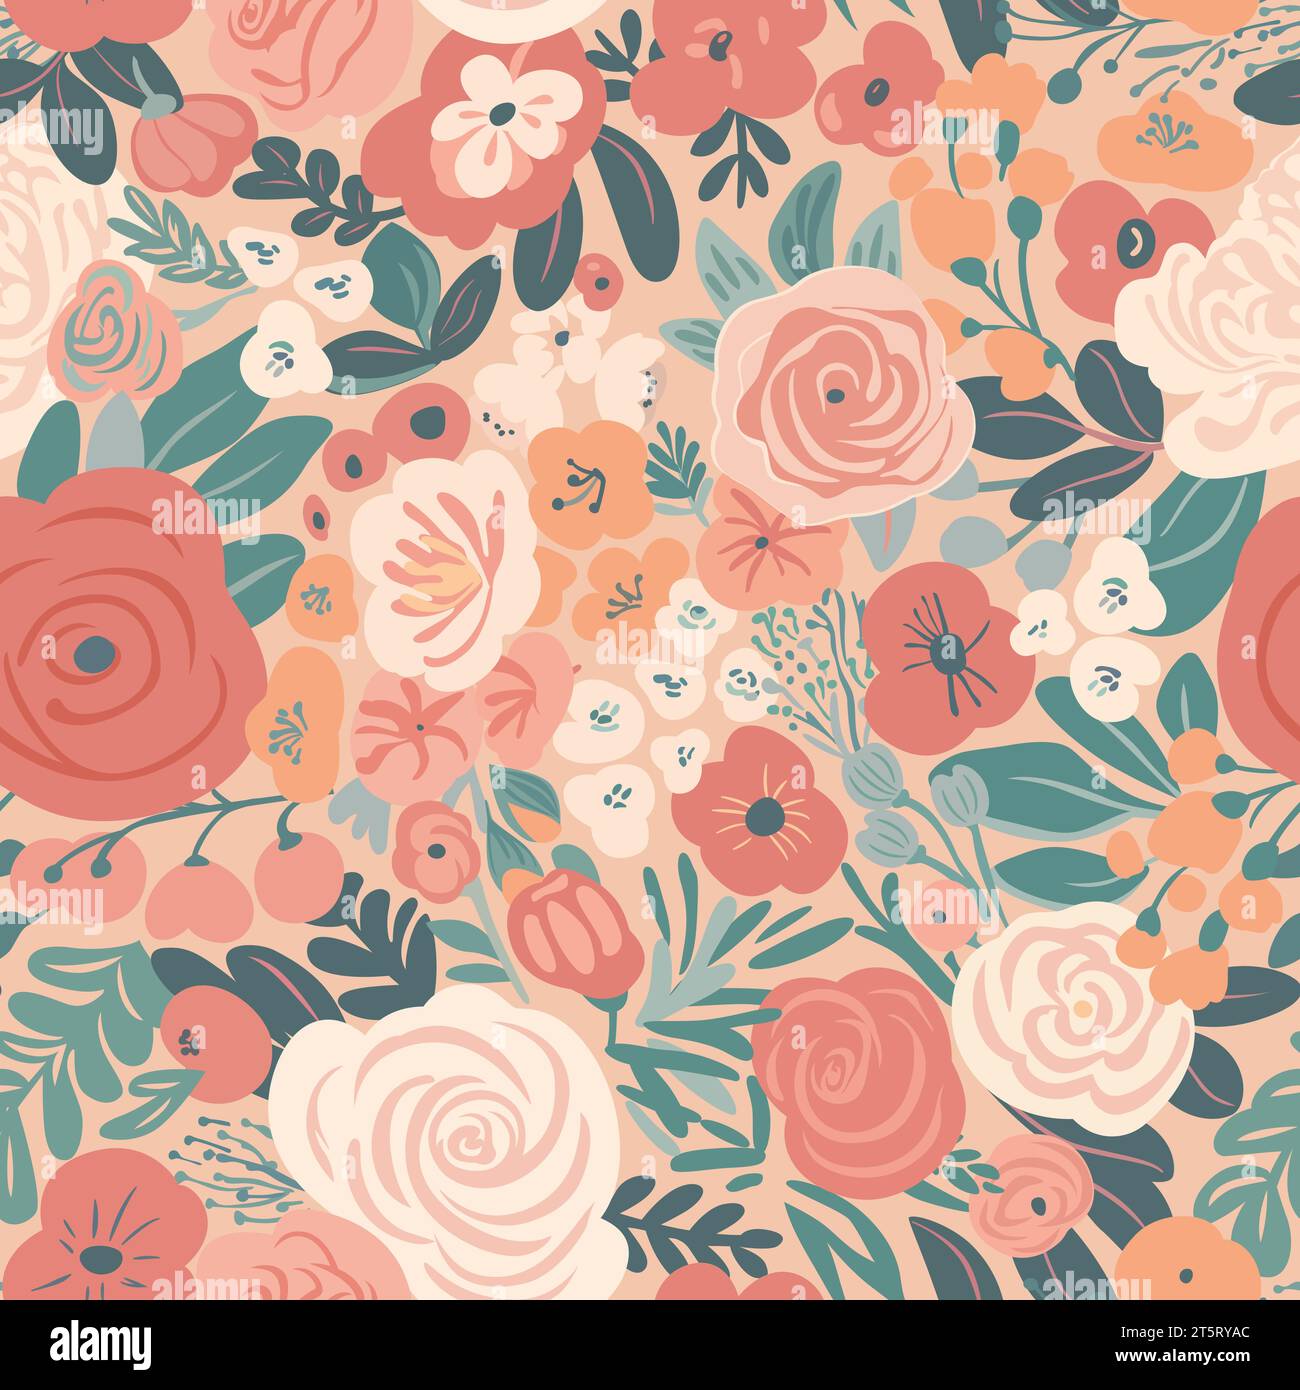 Seamless romantic pattern with summer blooming flowers peonies and roses on a beige background. Vector format. Stock Vector